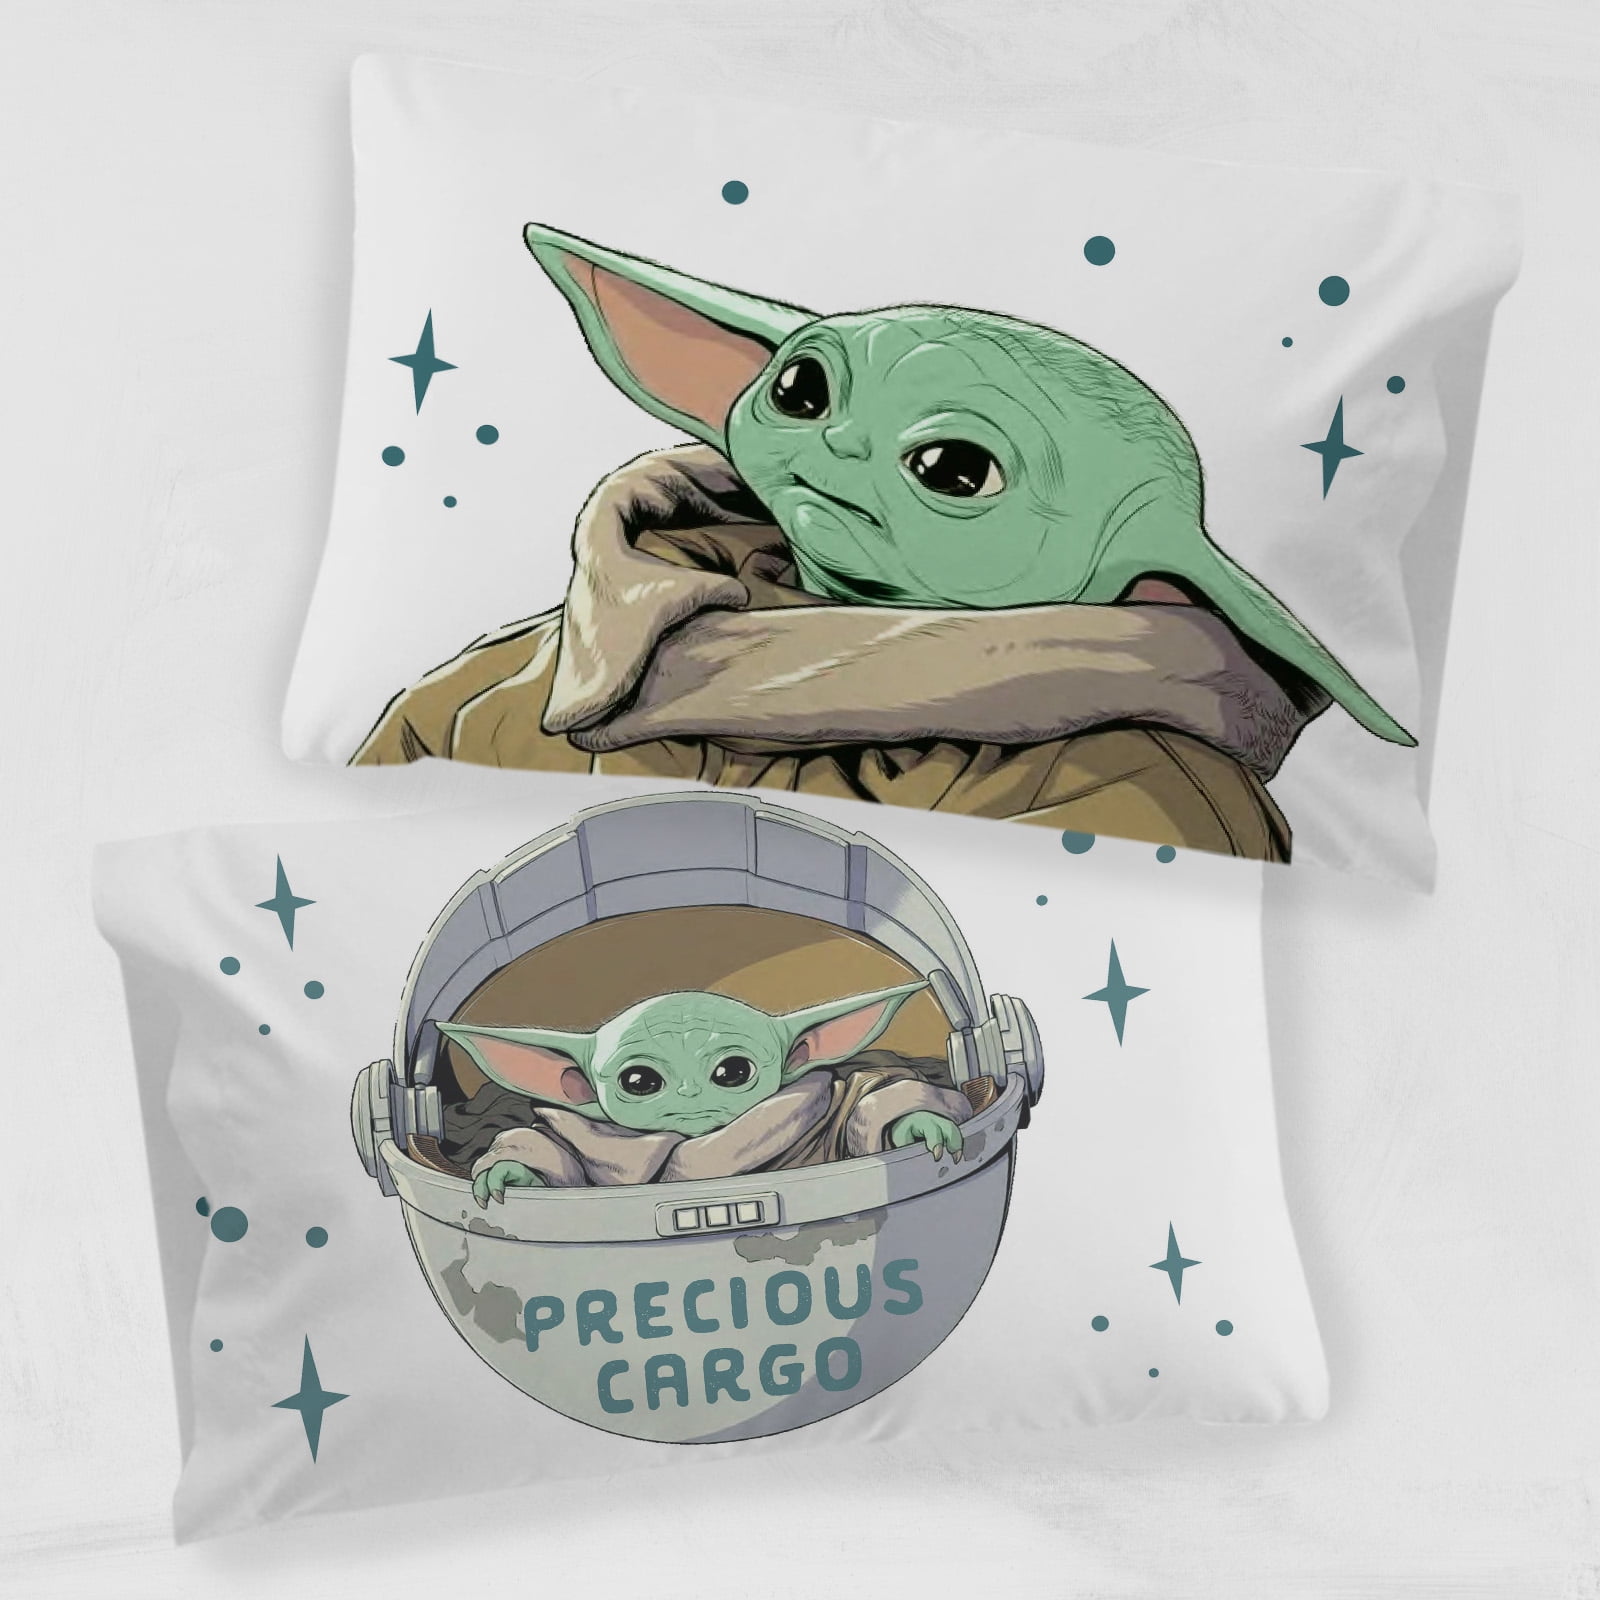 Star Wars Plush Toddler Pillow, 12 x 15, Multi-Colored, 15 x 12, 1 Count